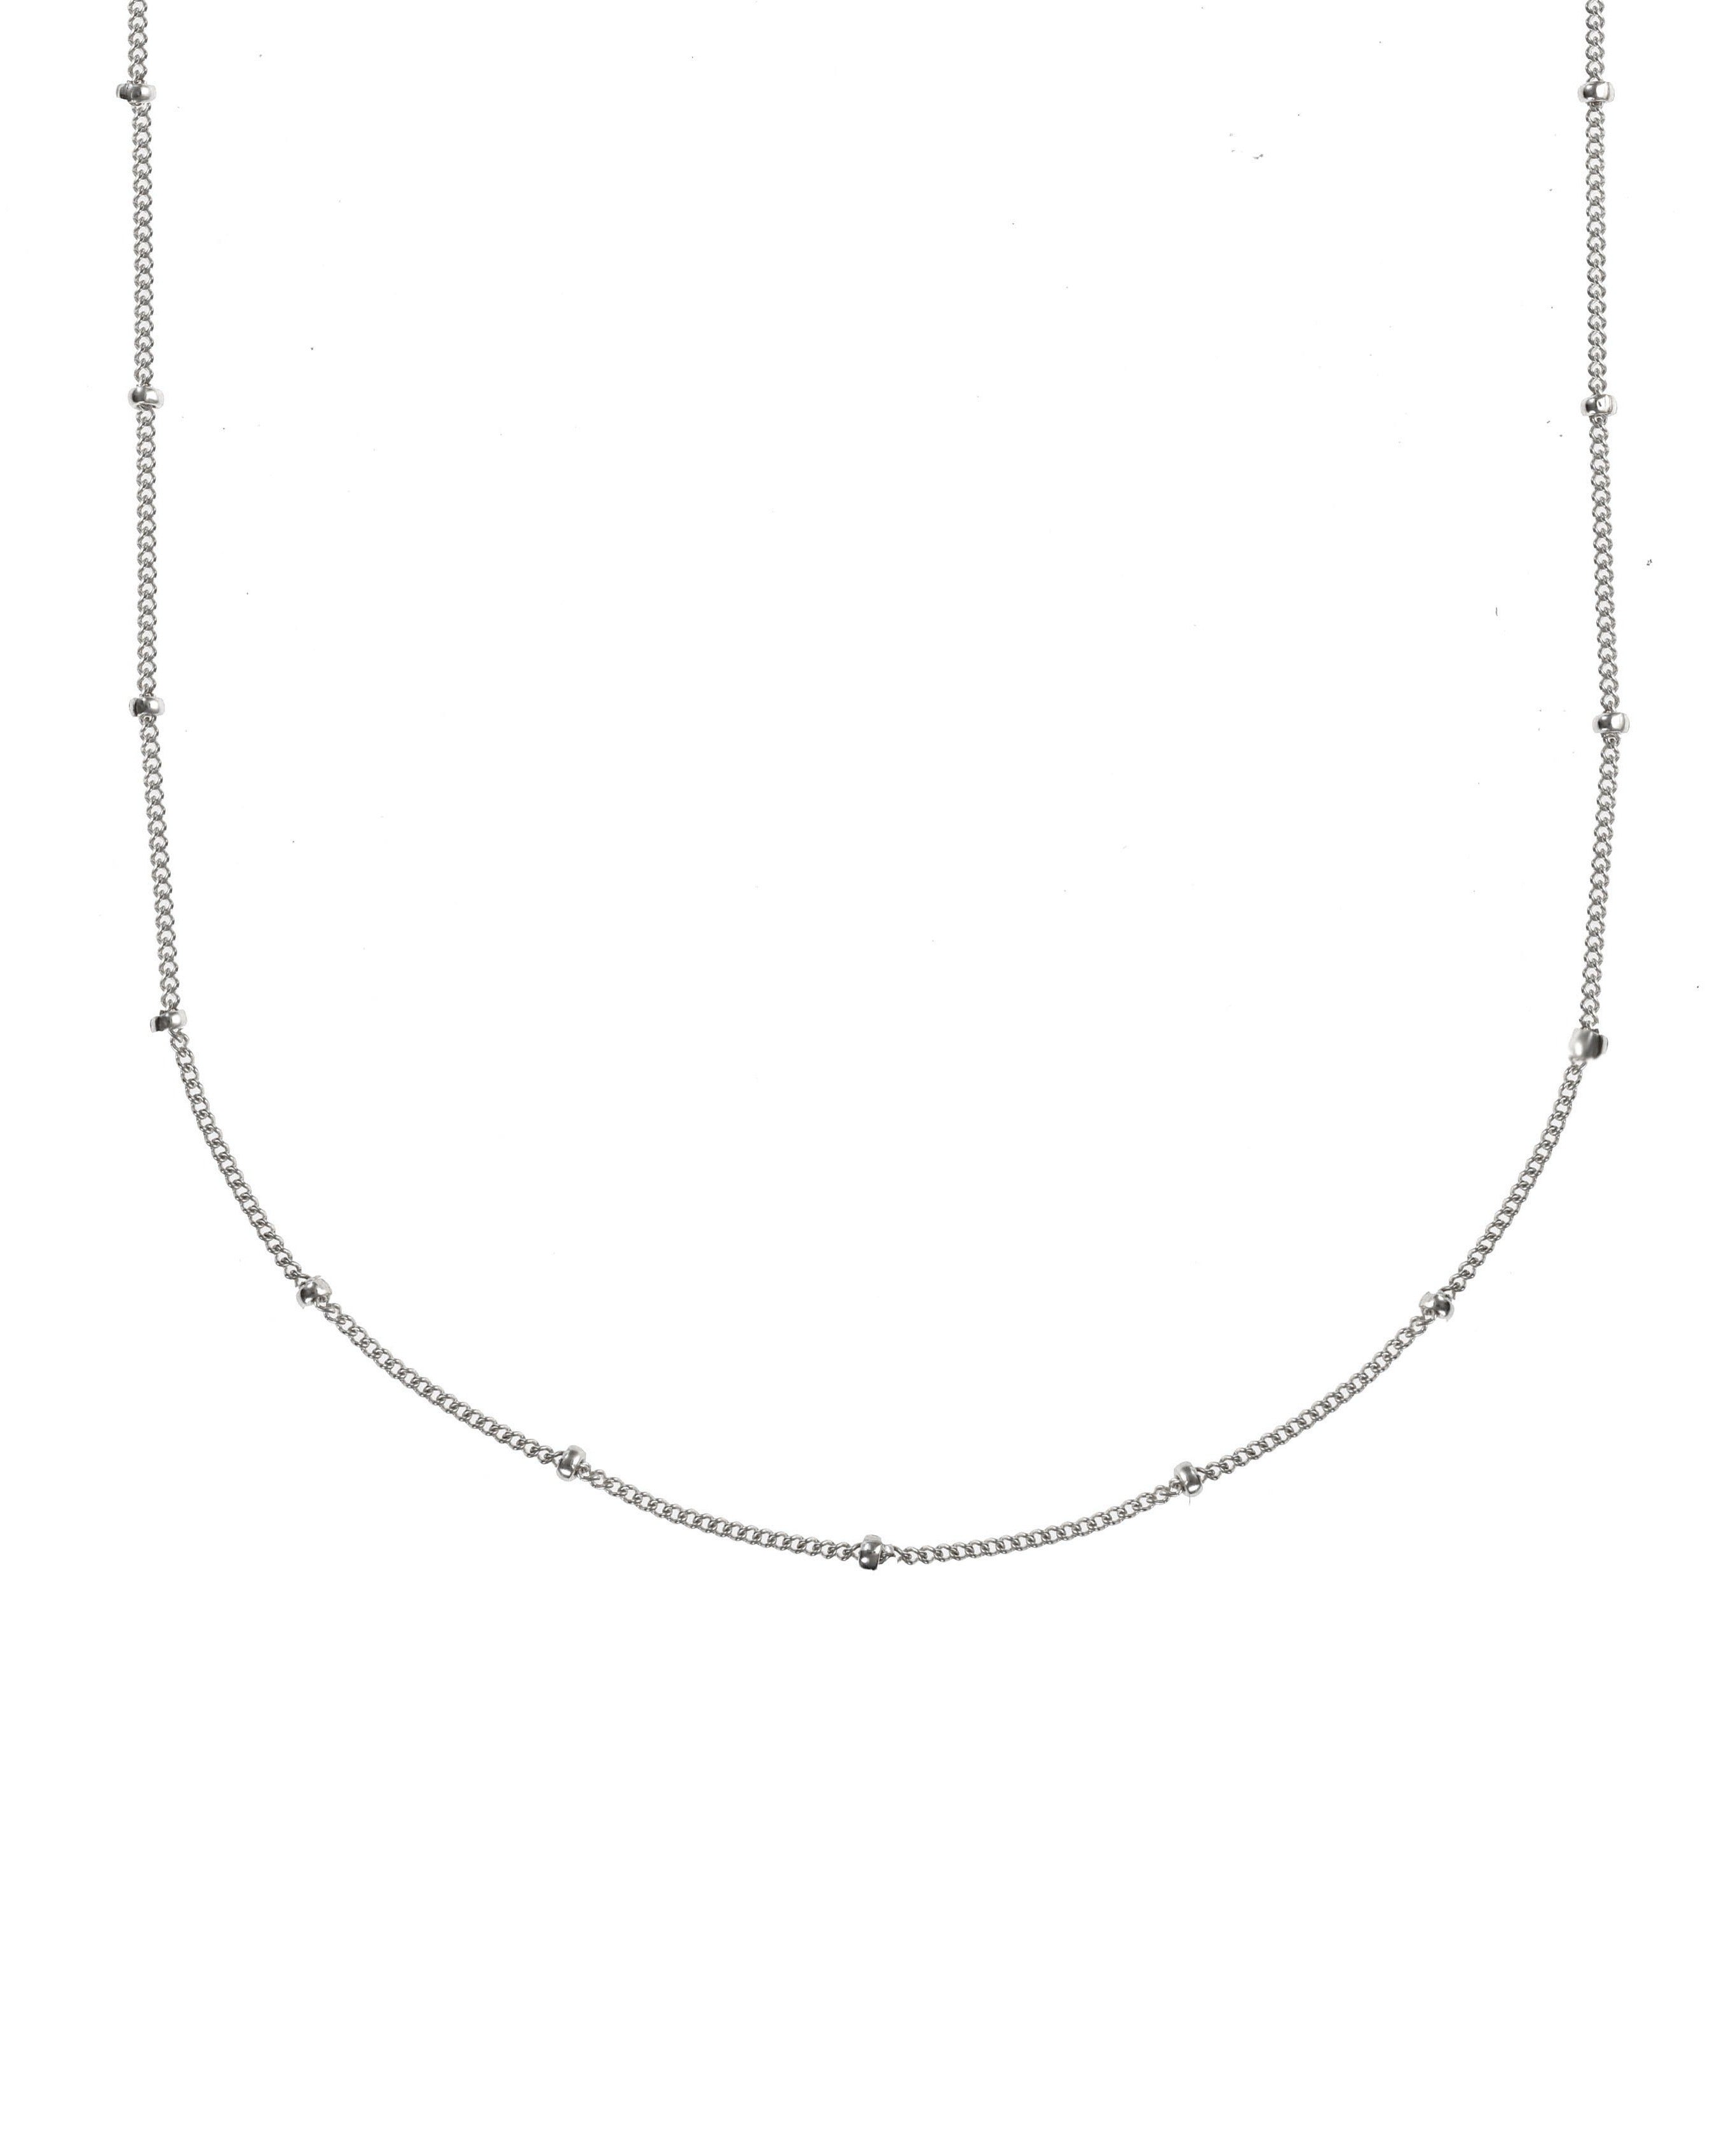 Dots Choker by KOZAKH. A 12 to 14 inch adjustable length necklace in Sterling Silver, featuring a 1mm curb chain with balls design.